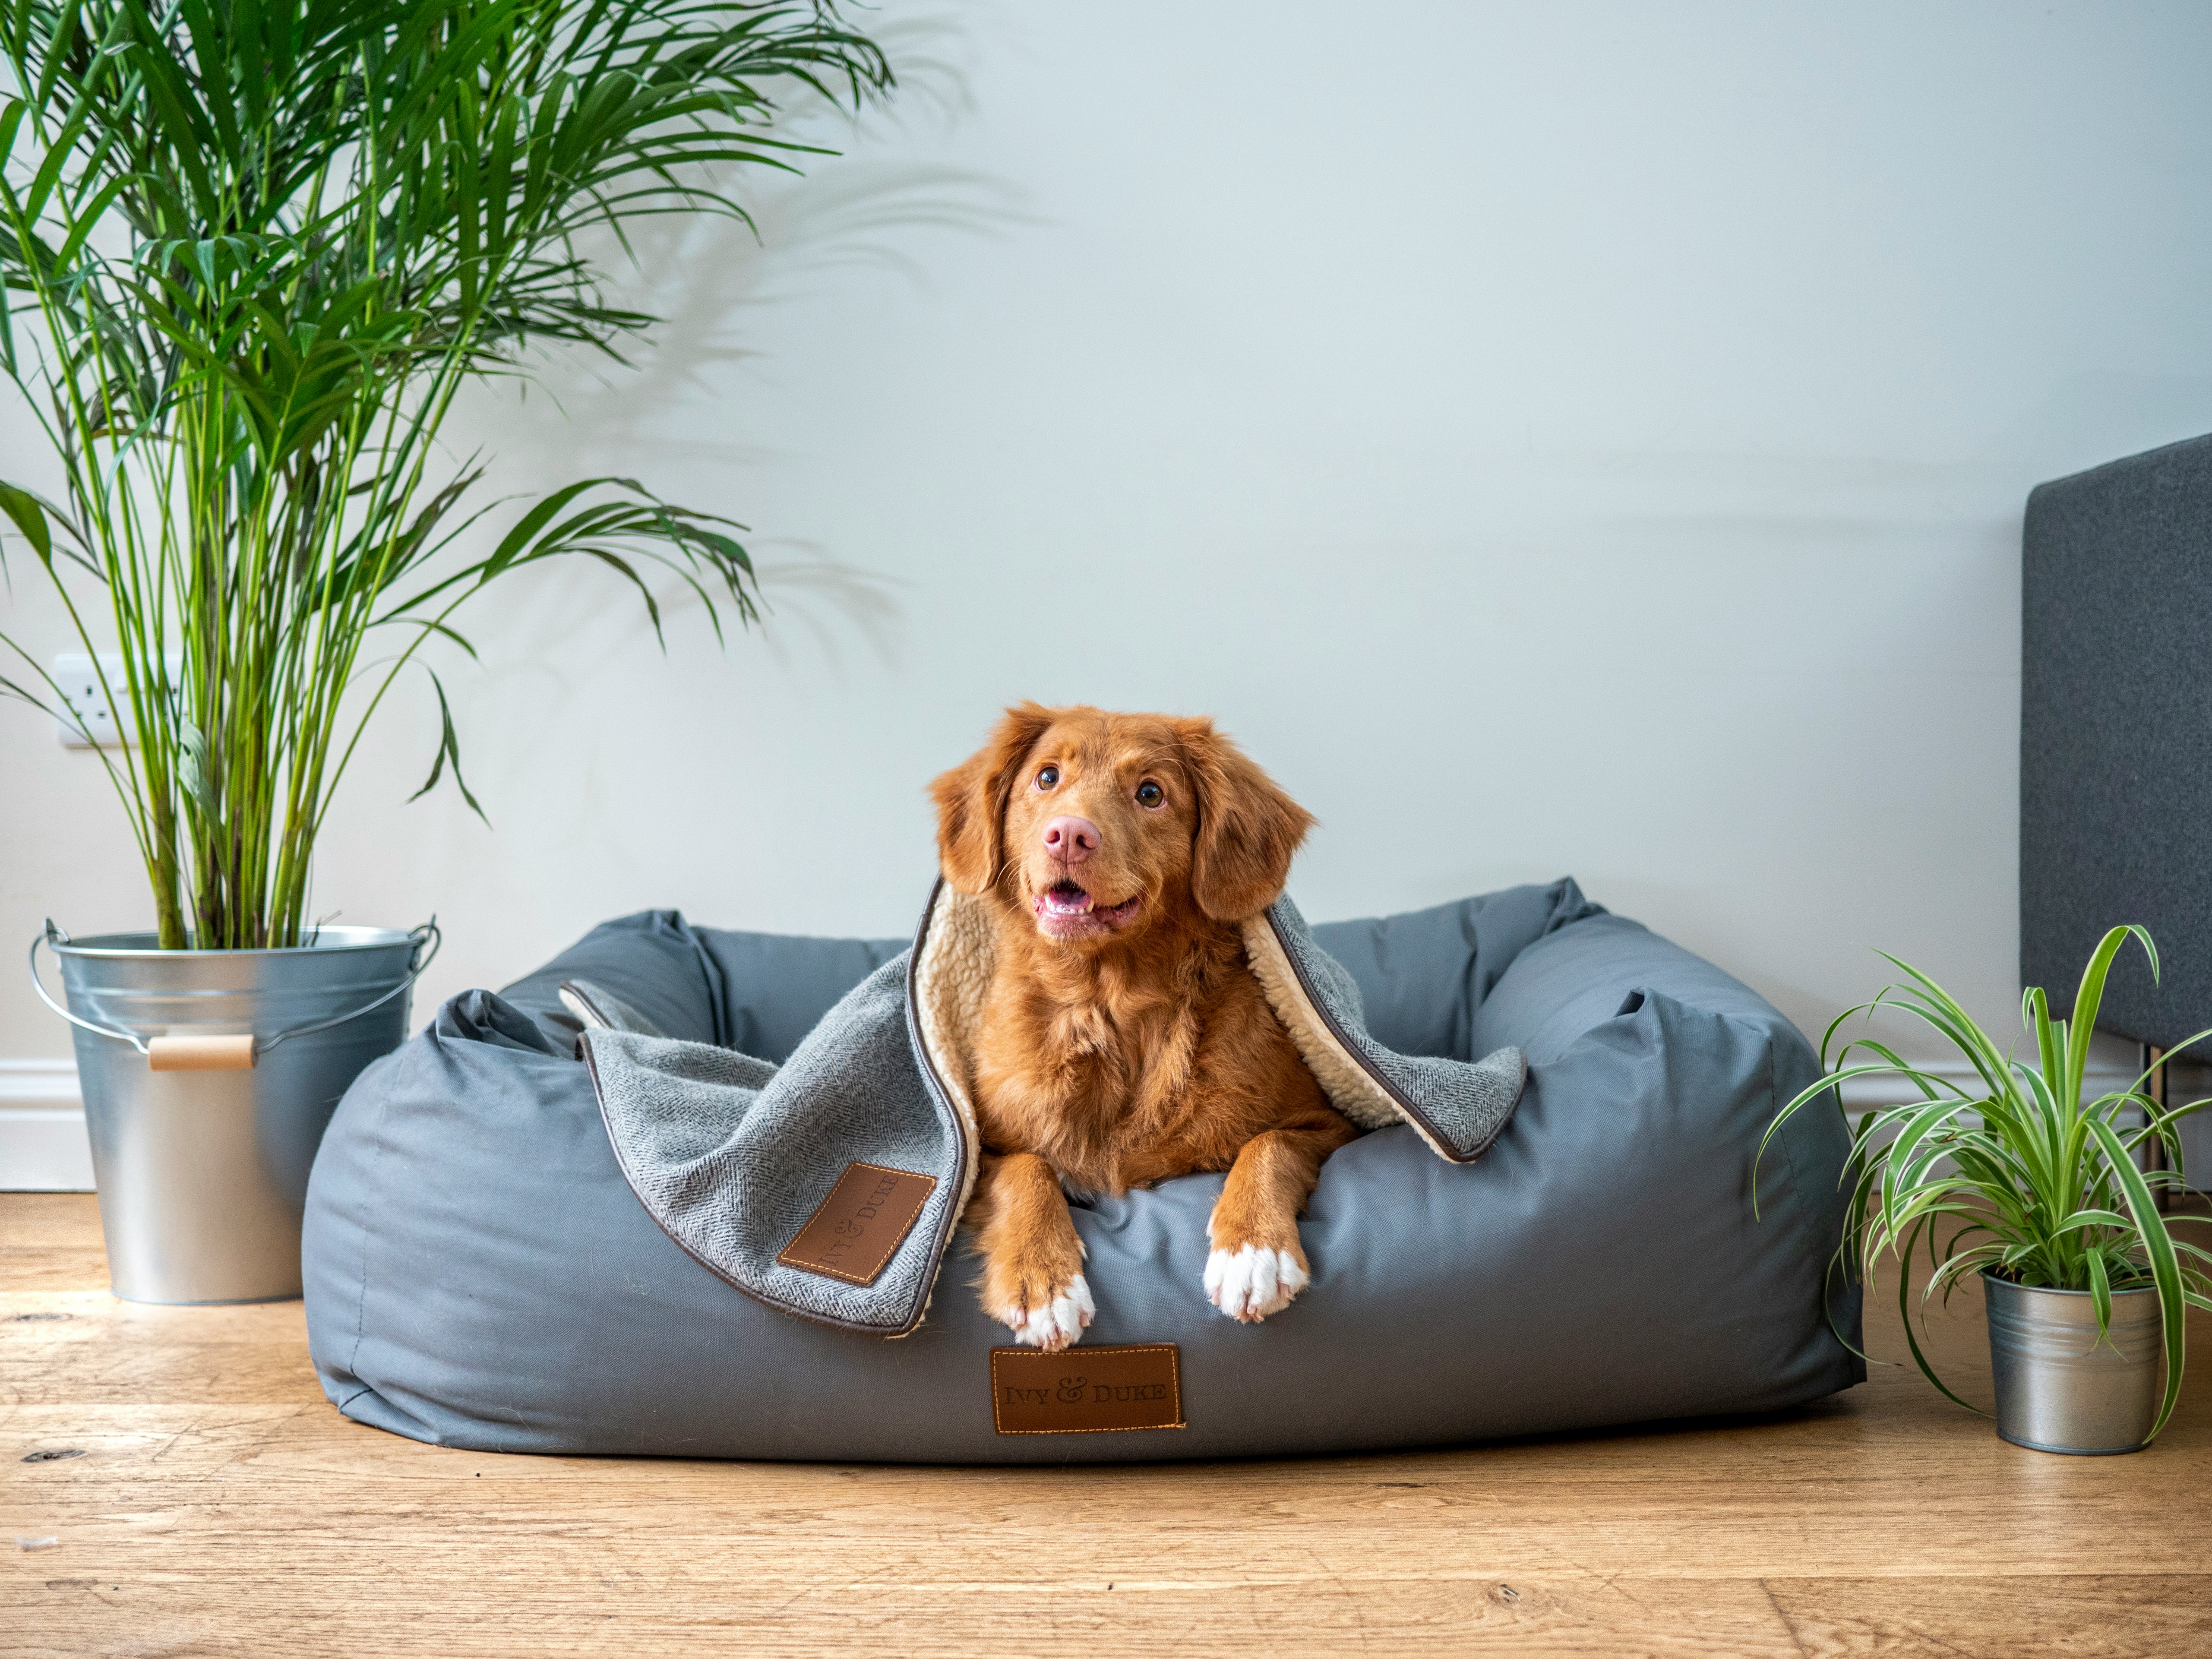 From Waste To Wealth: How One Pet Product Innovator Is Shaping A Sustainable Future